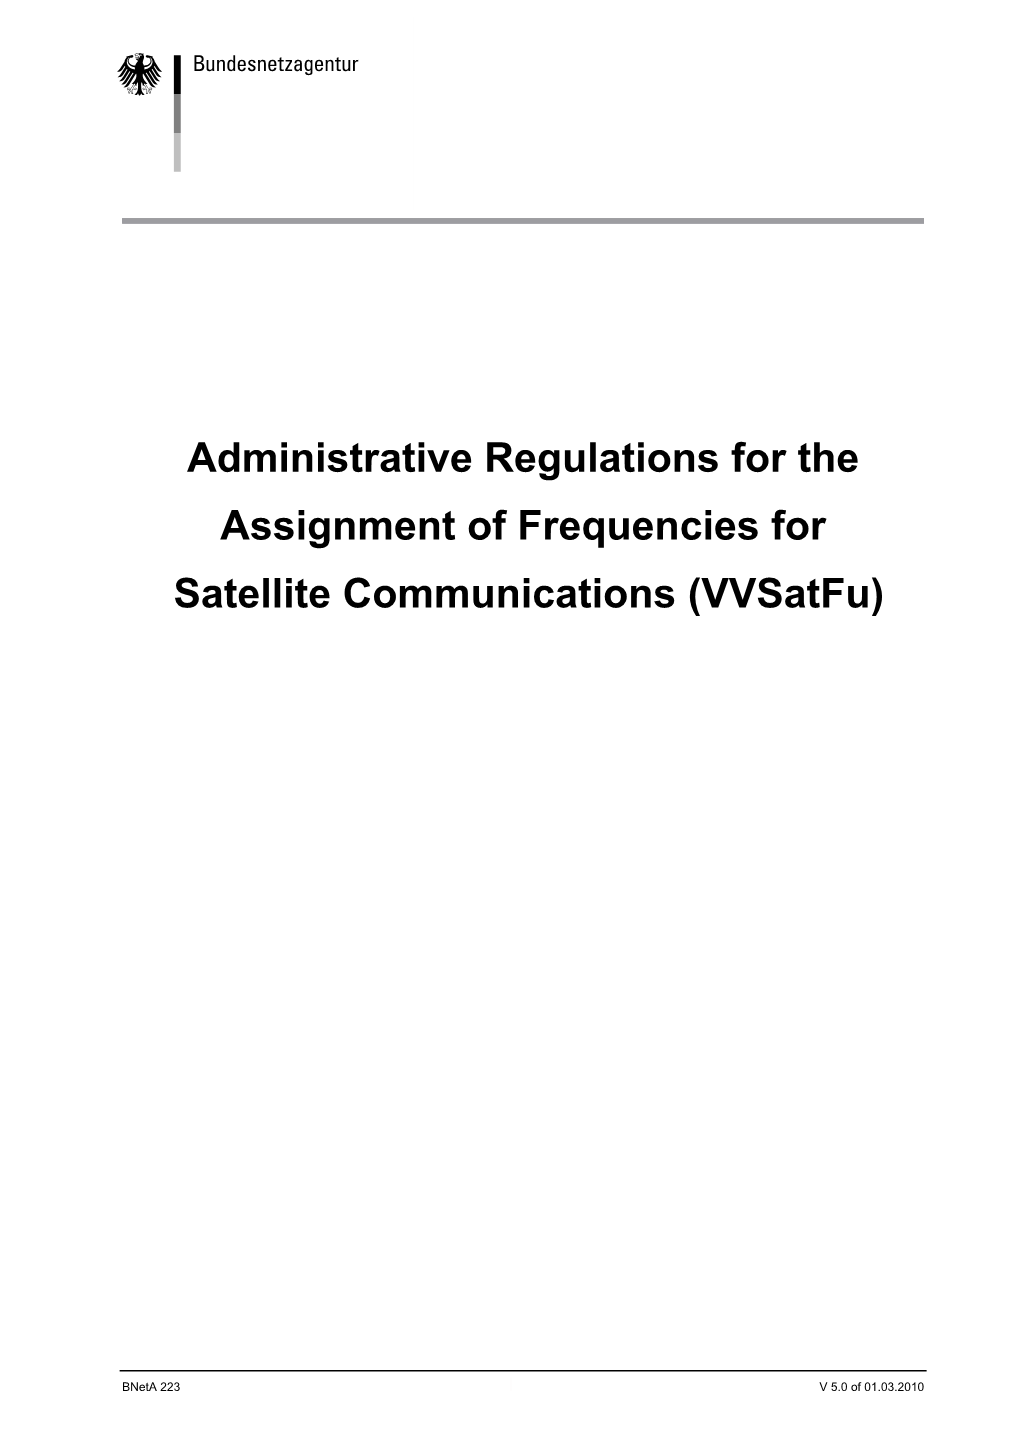 Administrative Regulations for the Assignment of Frequencies for Satellite Communications (Vvsatfu)